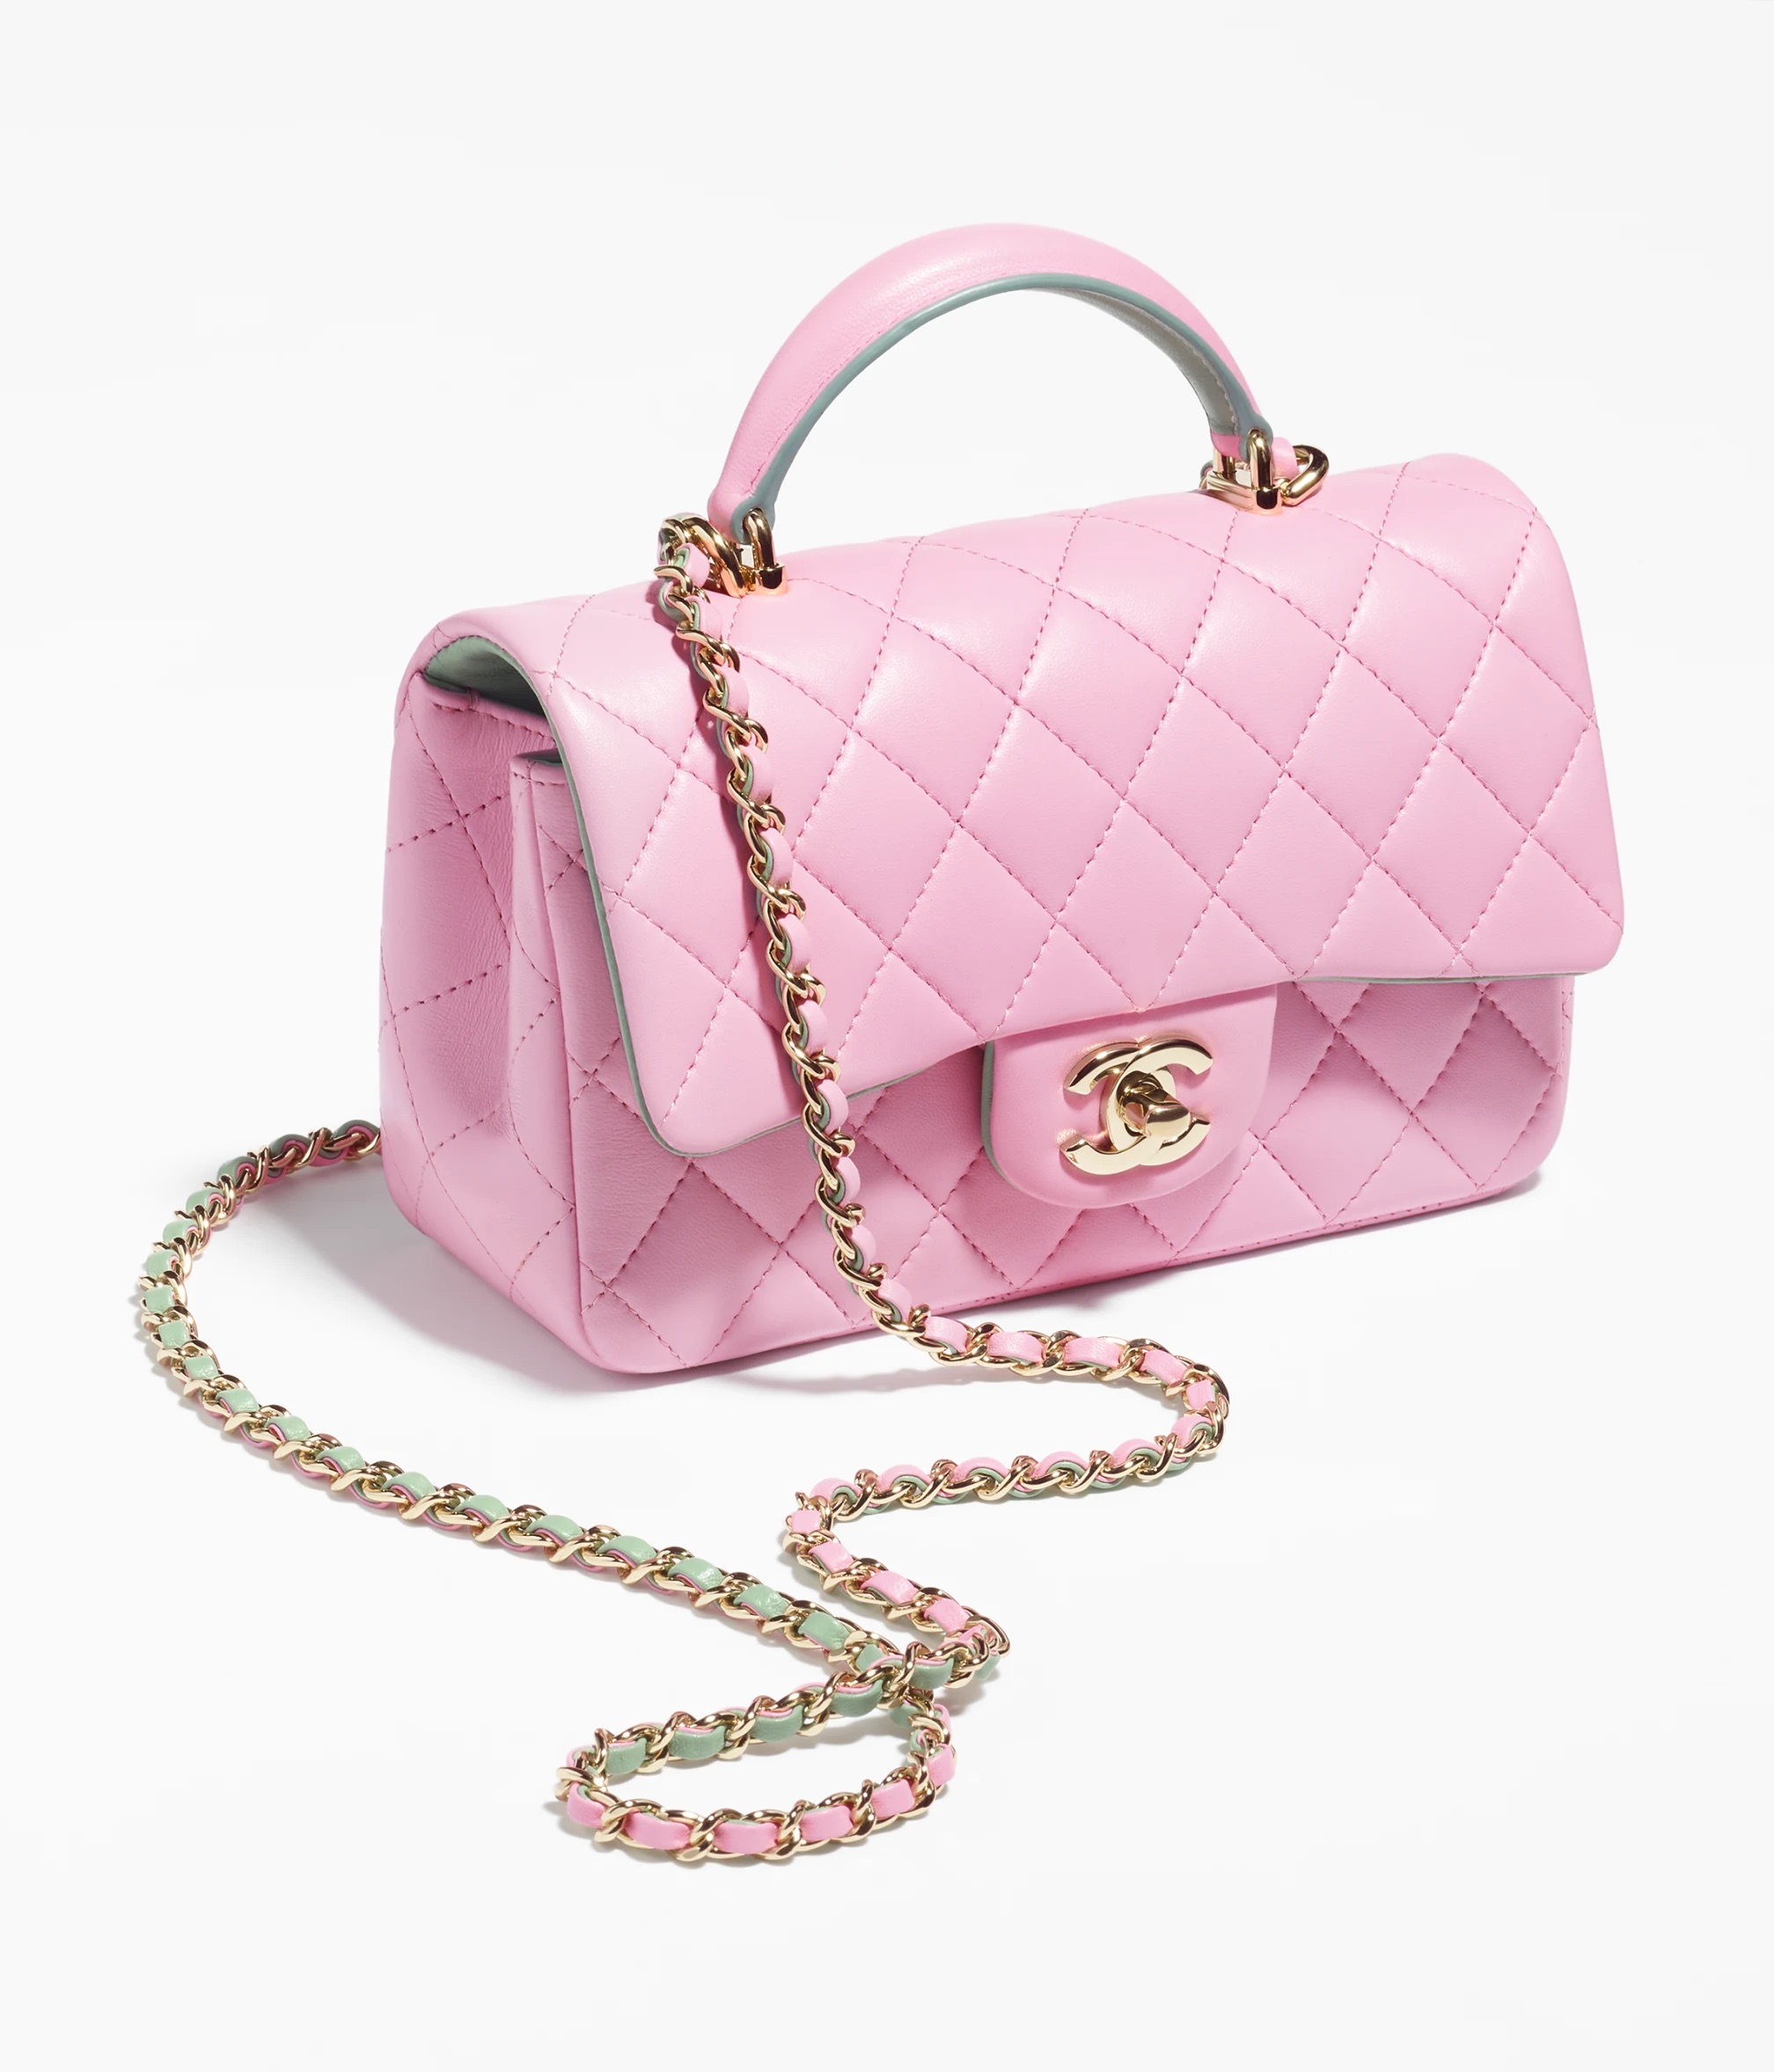 Budget Friendly Chanel Bags Under 5K